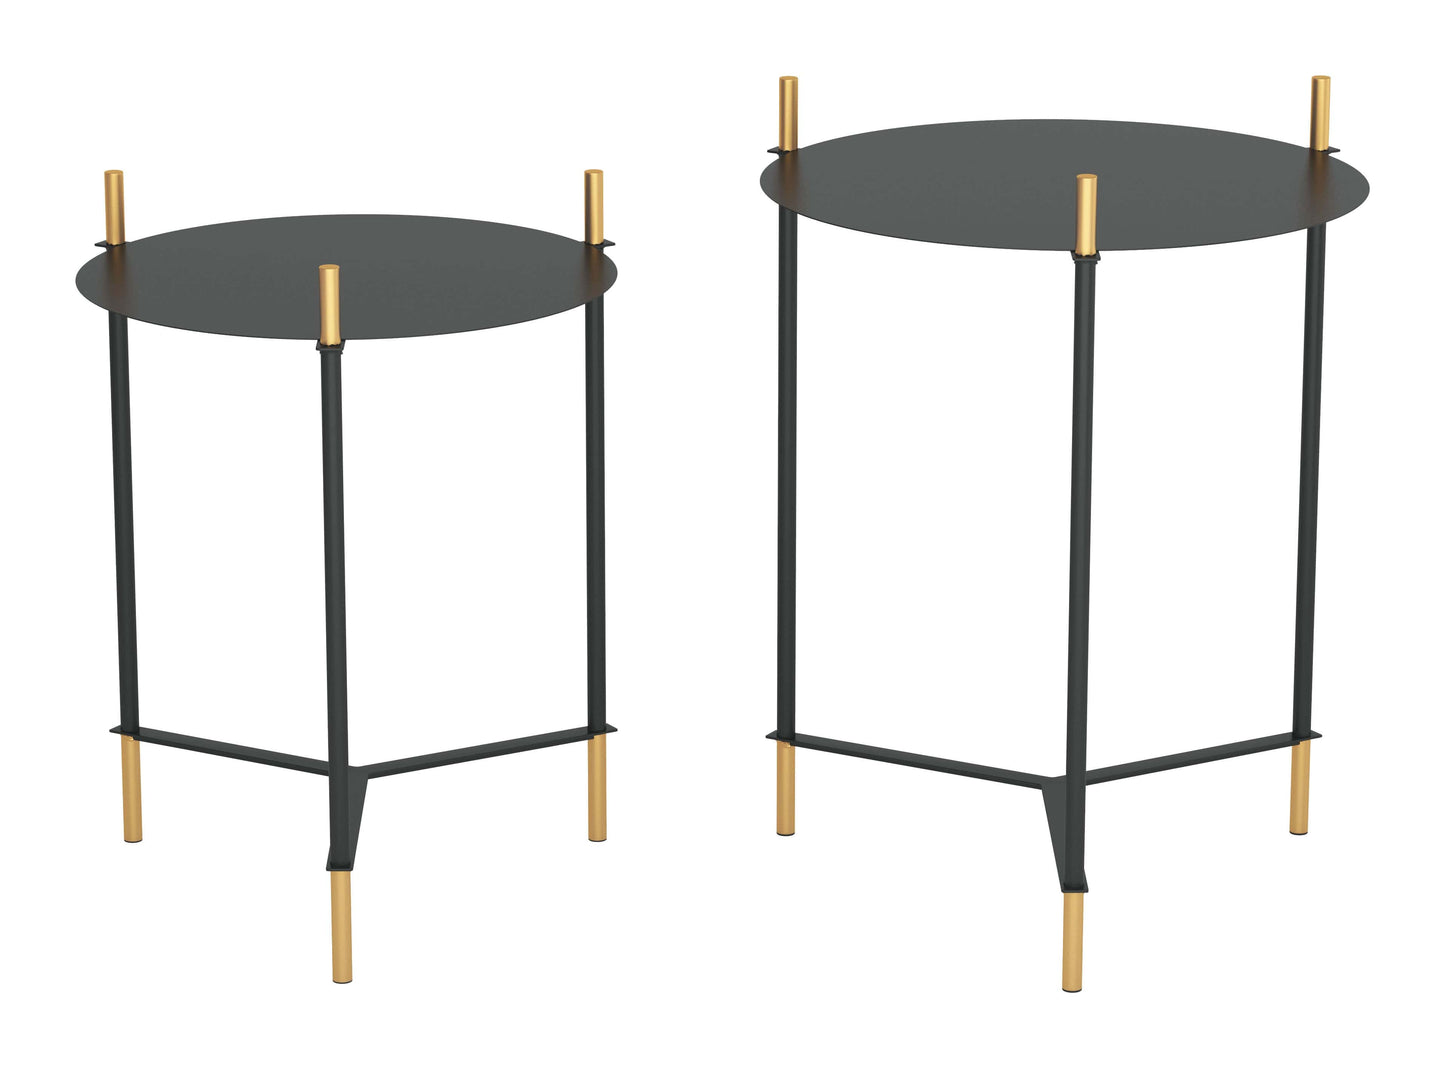 Commercial quality side tables